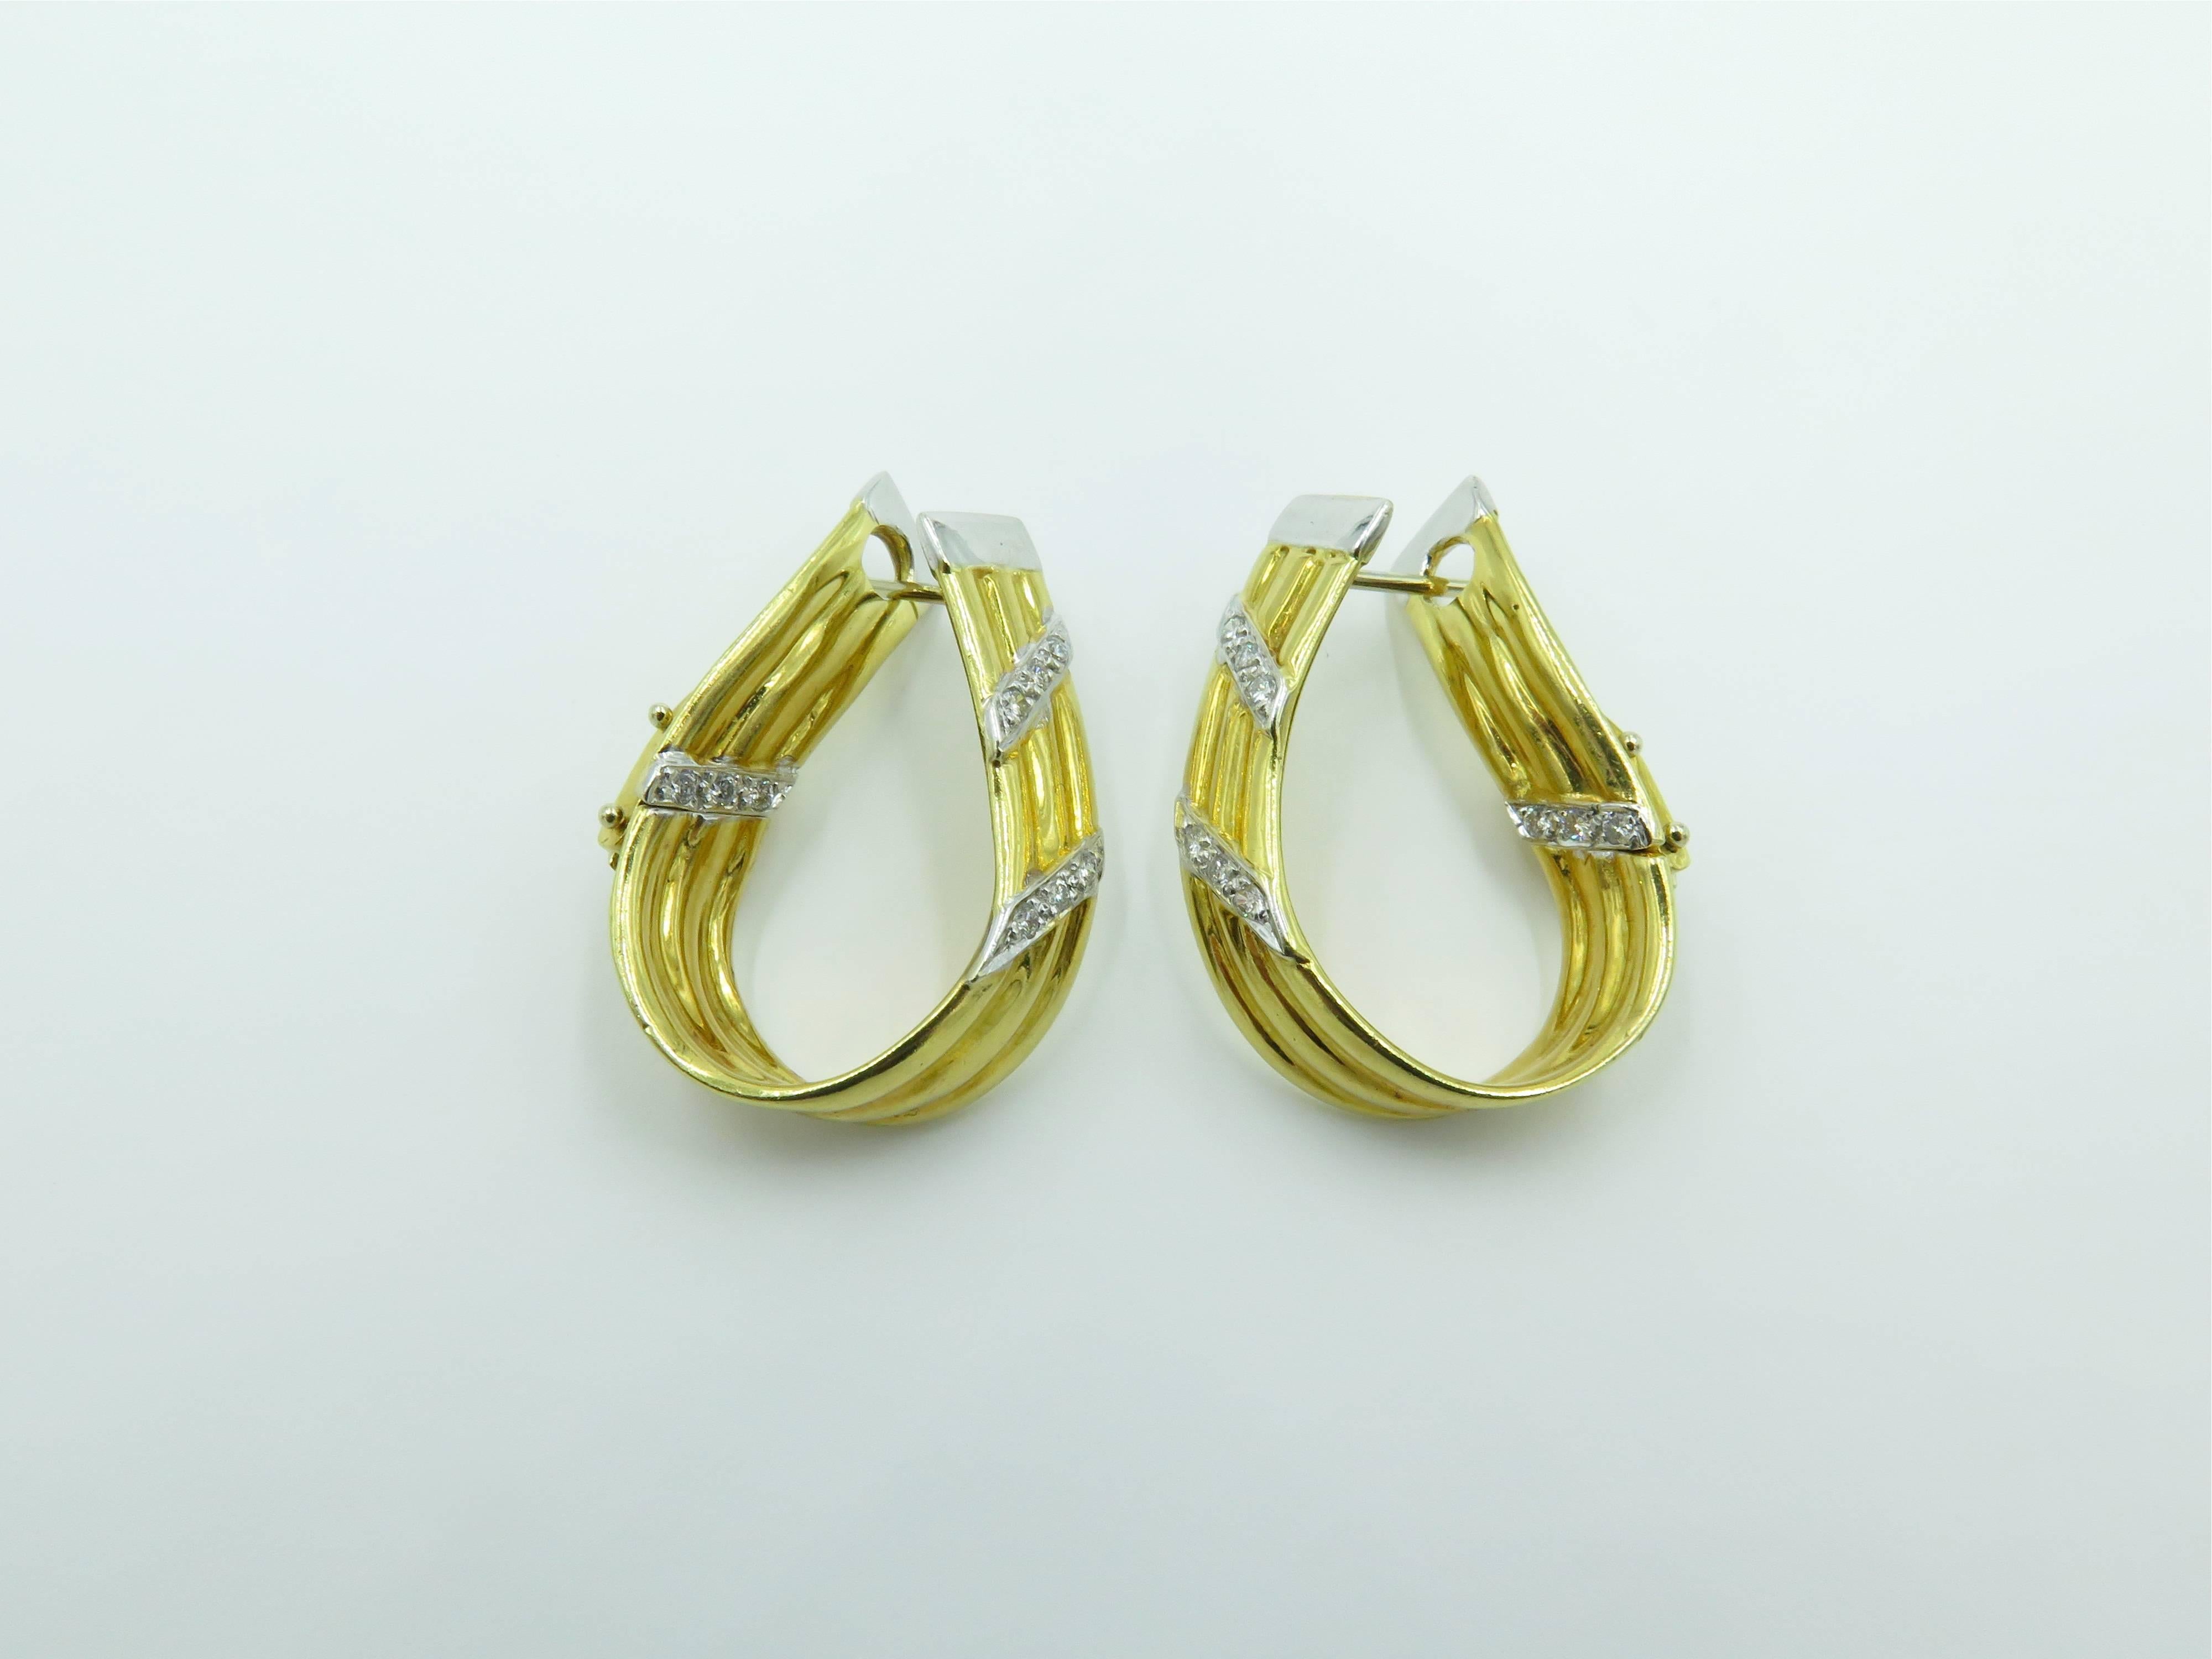 A pair of 18 karat yellow gold and diamond earrings, of elongate fluted hoop design, enhanced by lines of circular cut diamonds. Length is approximately 1 1/8 inches, gross weight is approximately 12.7 grams. 